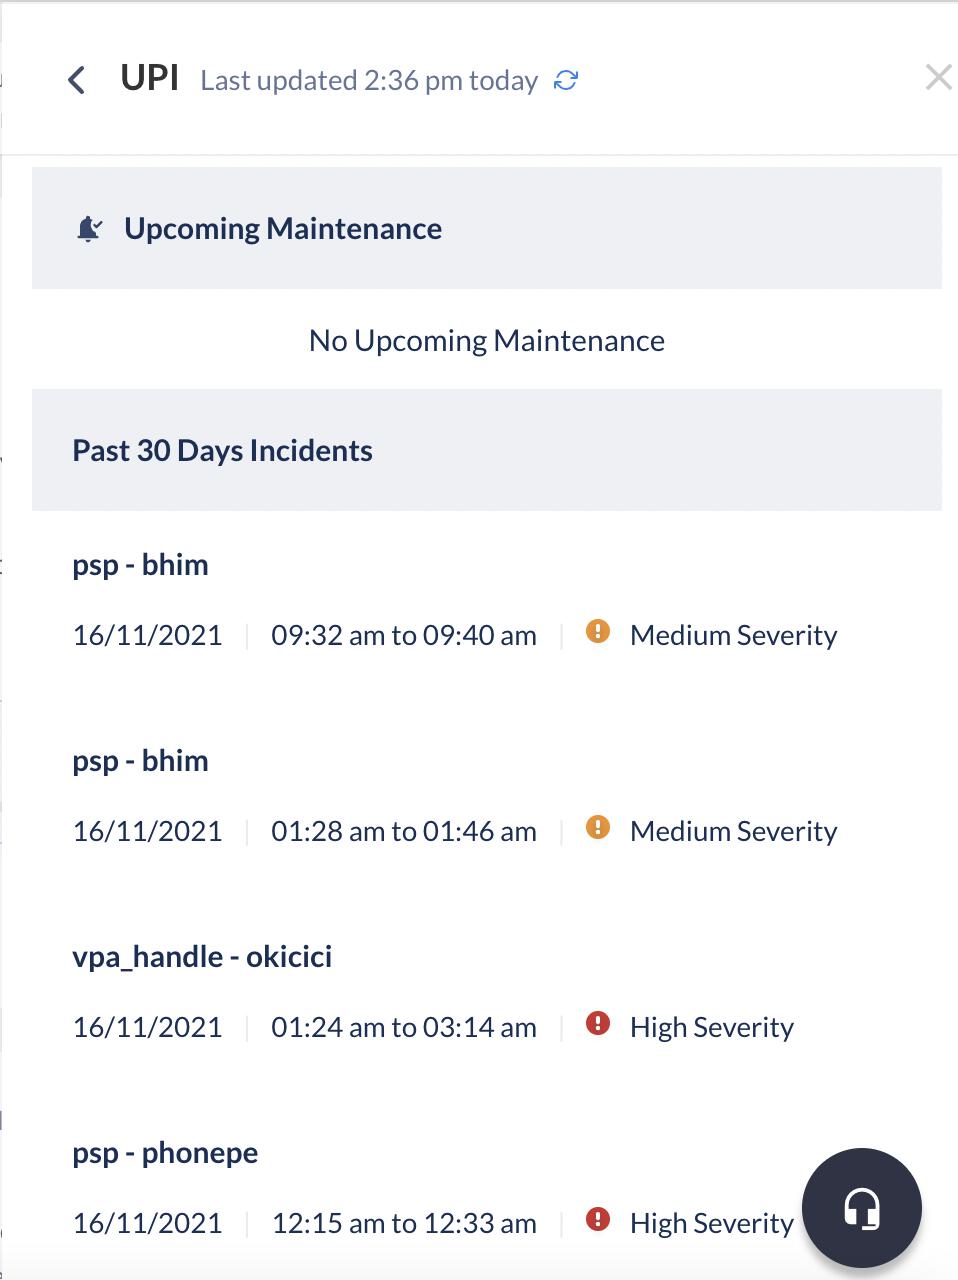 Bank's downtime - Past 30 days incidents with downtime date, duration and severity levels